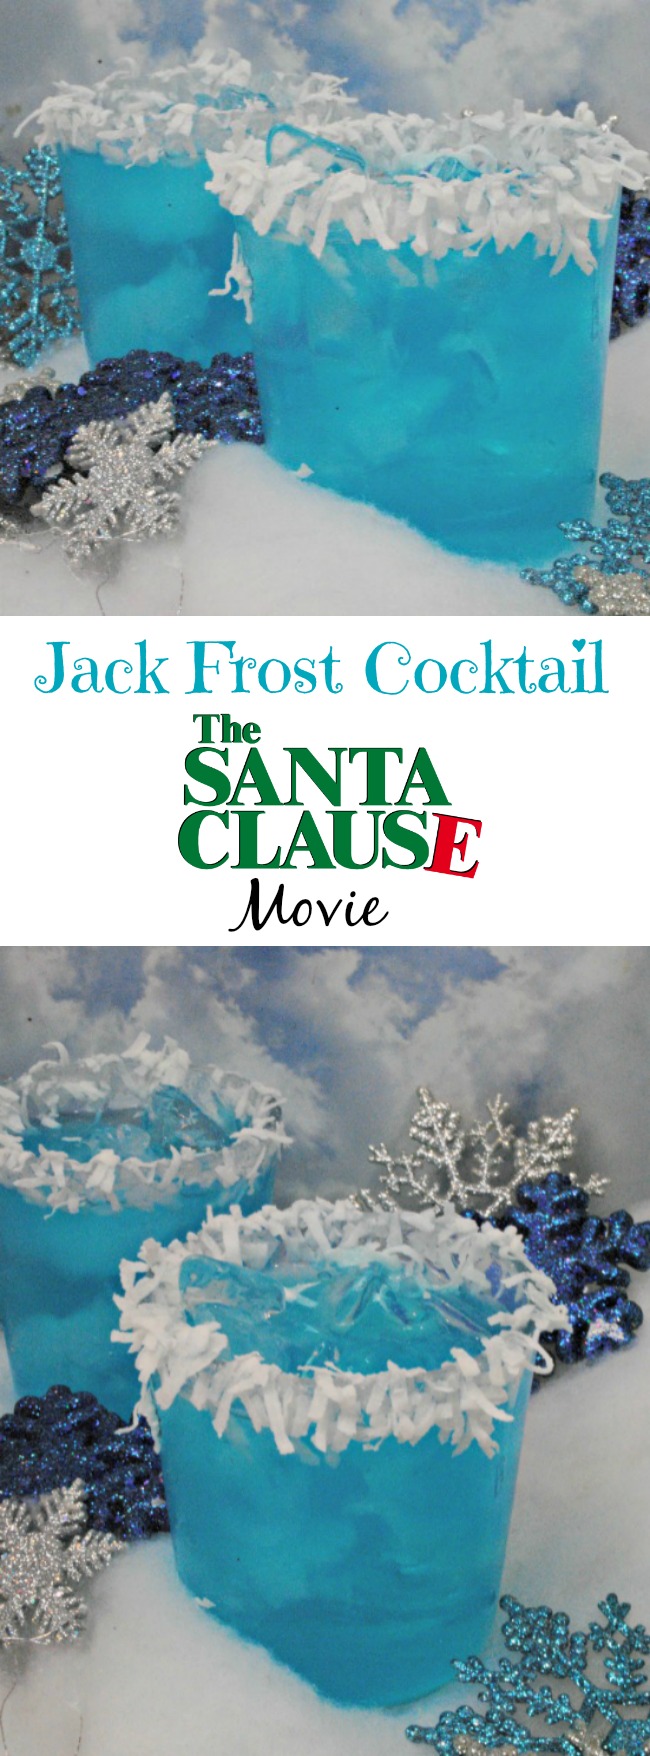 Last week I shared The Santa Clause movie cocktail recipe and today we have a fun Jack Frost Cocktail recipe from the movie also.